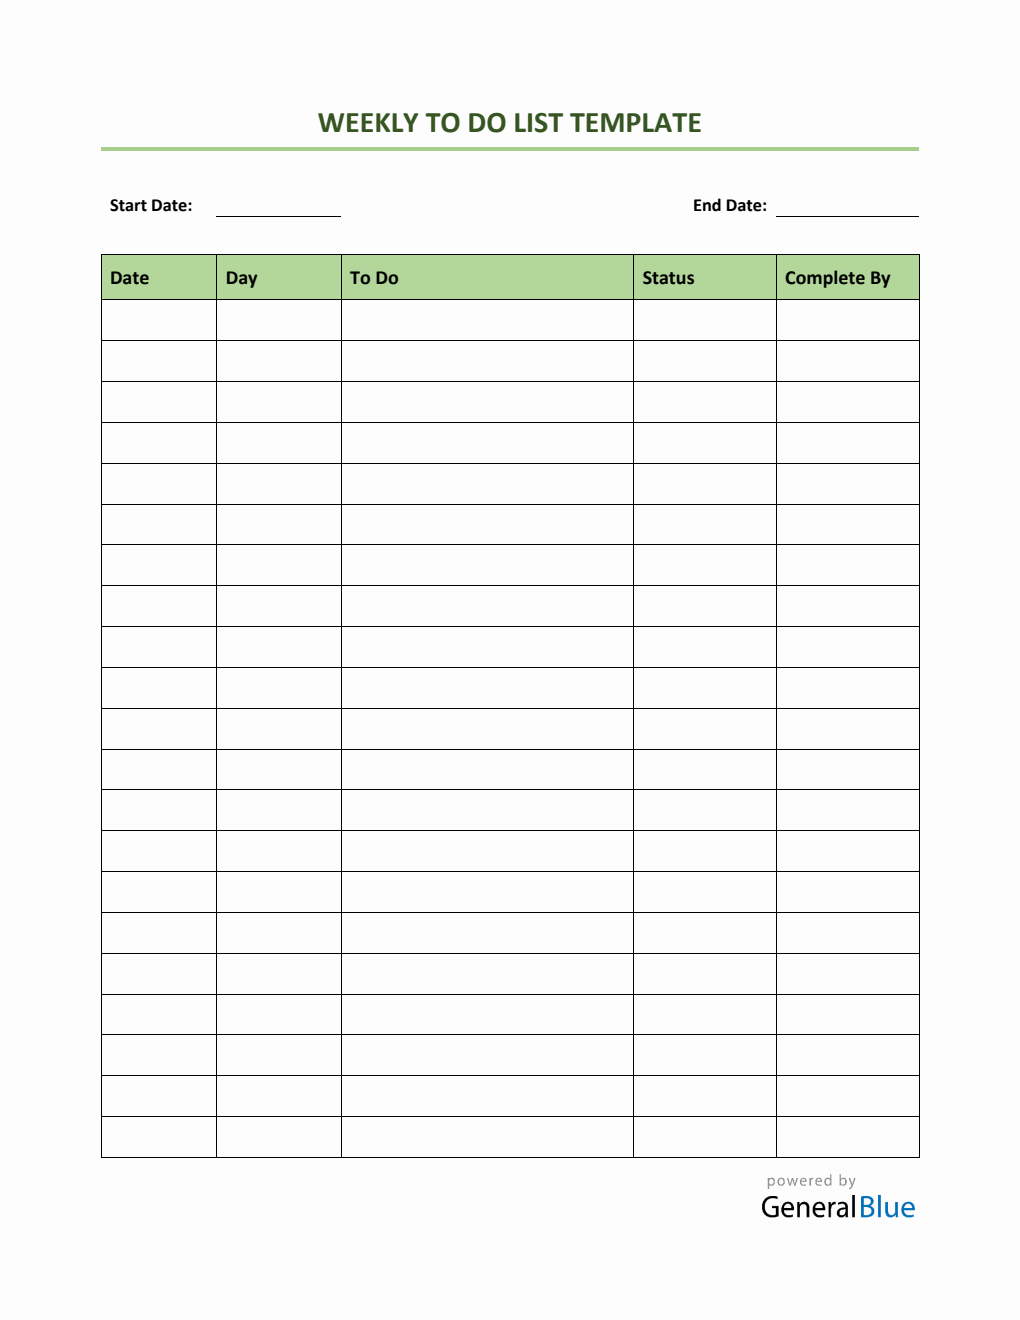 Weekly To Do List Template in PDF